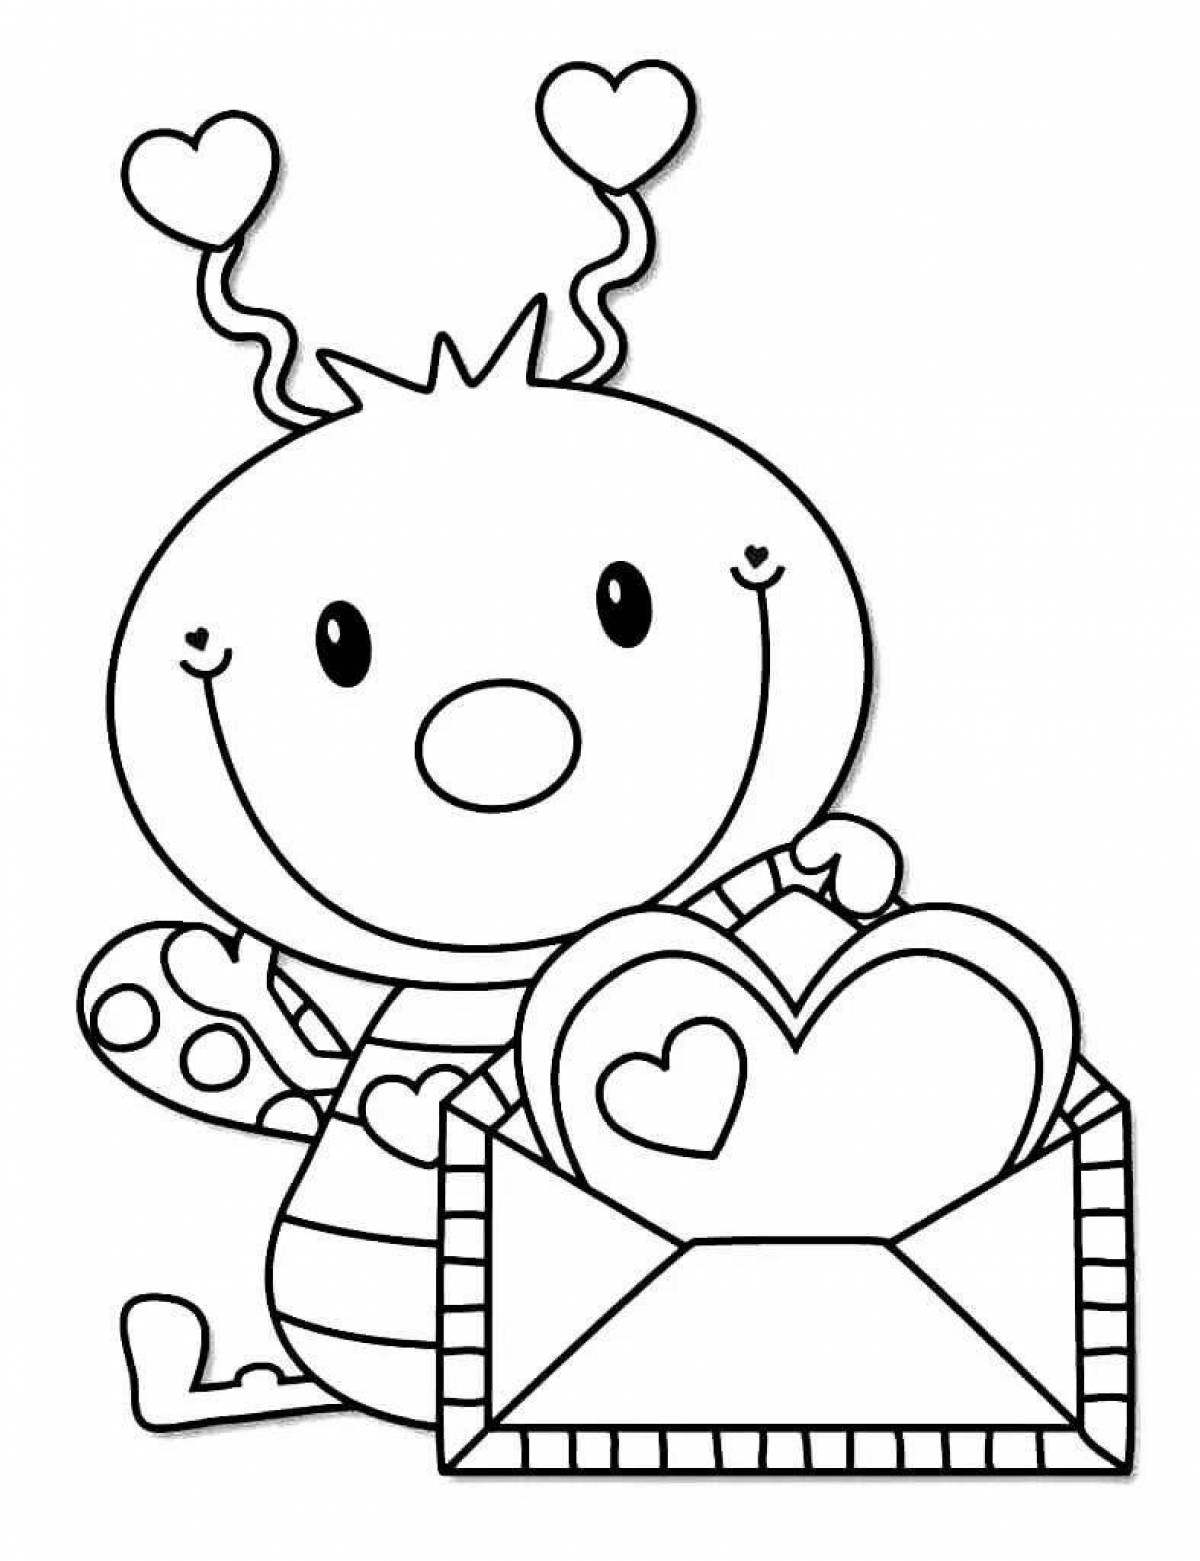 Soulful valentine's coloring book for kids